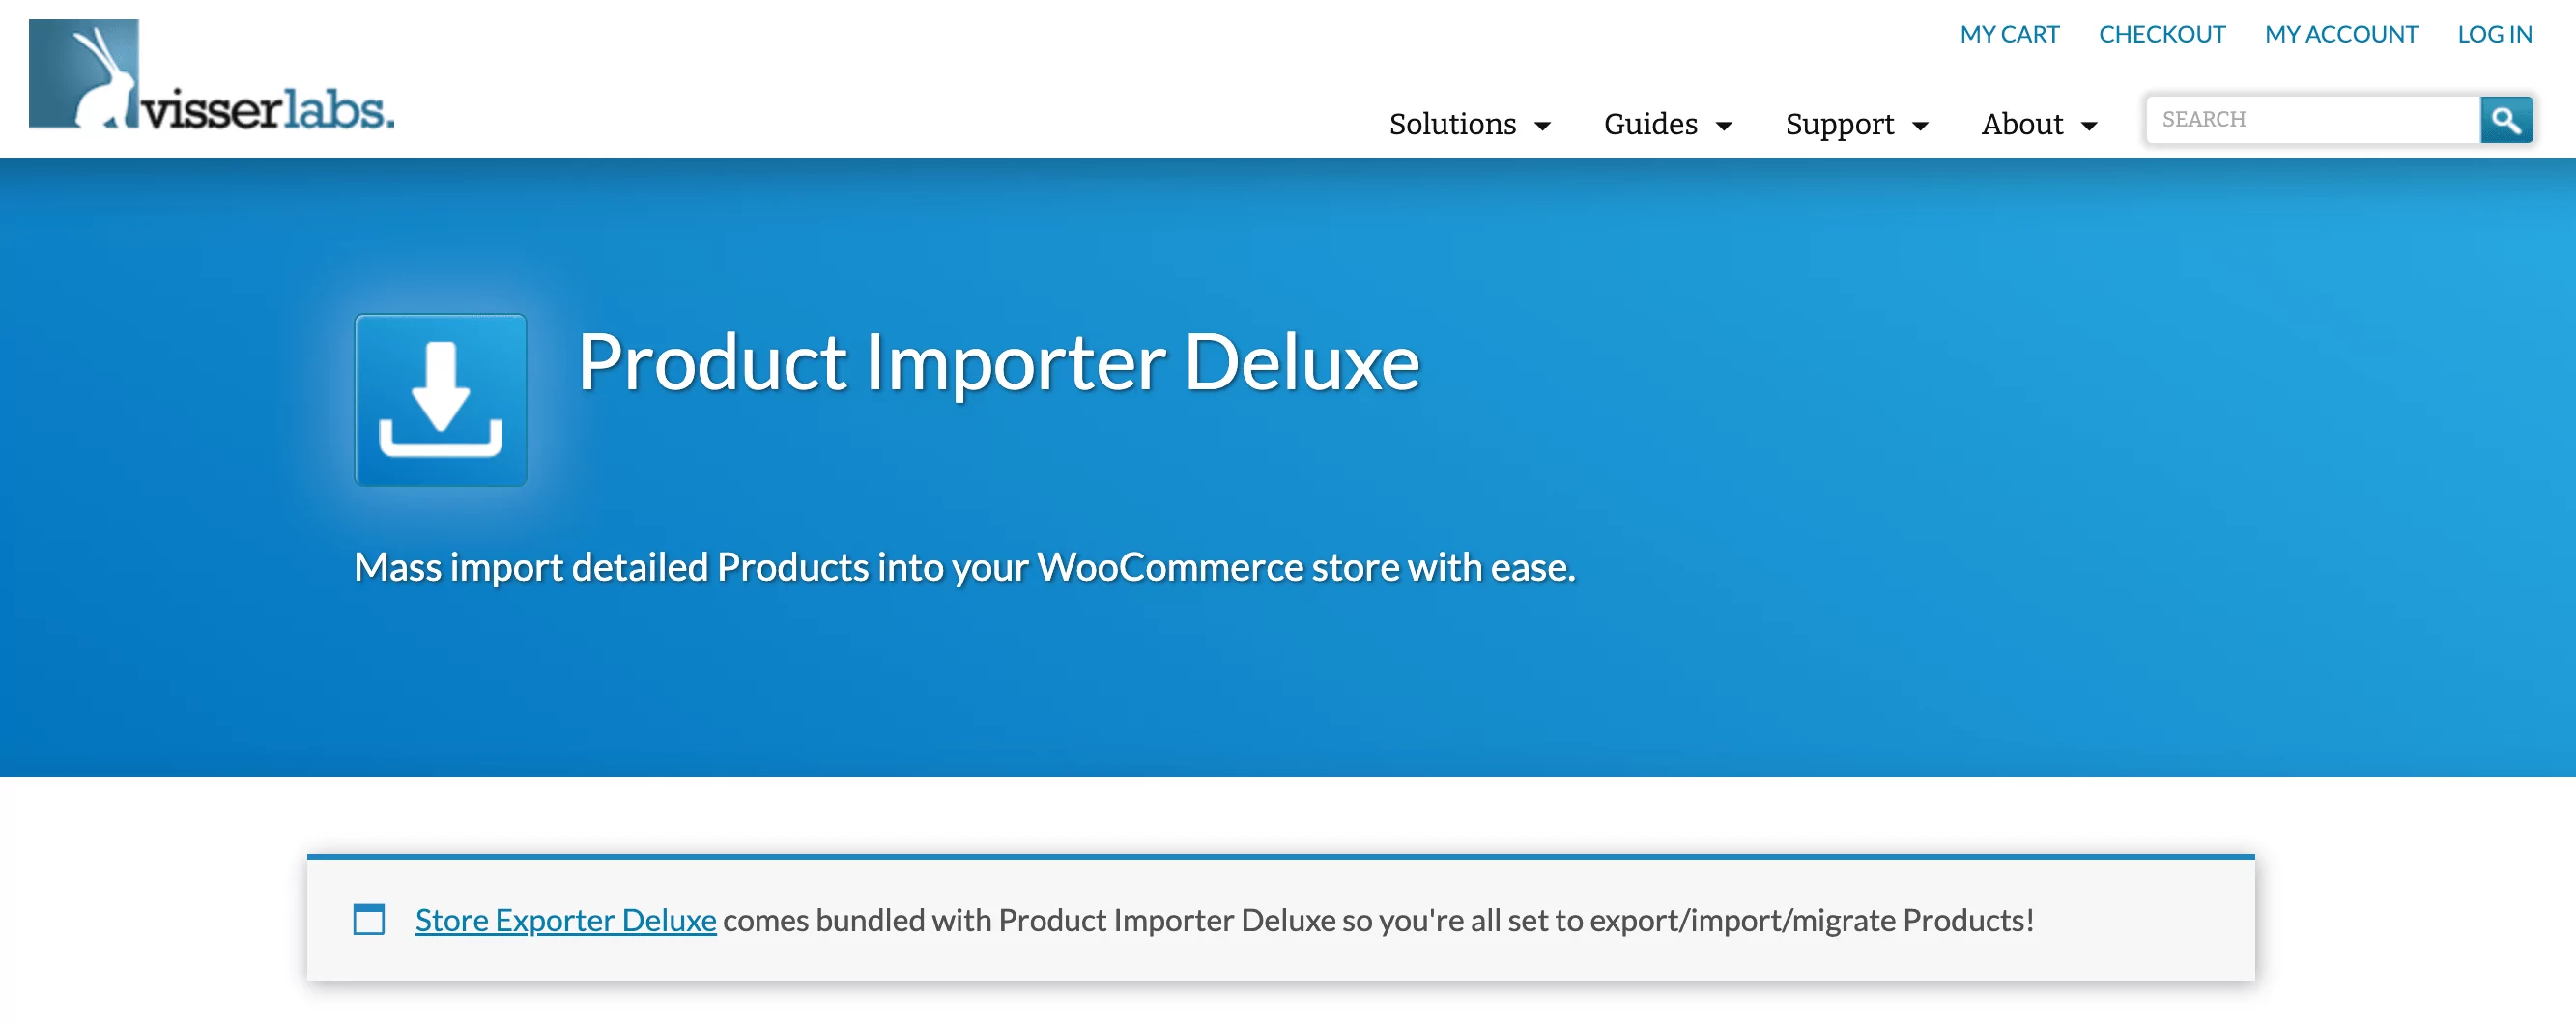 Product Importer Deluxe